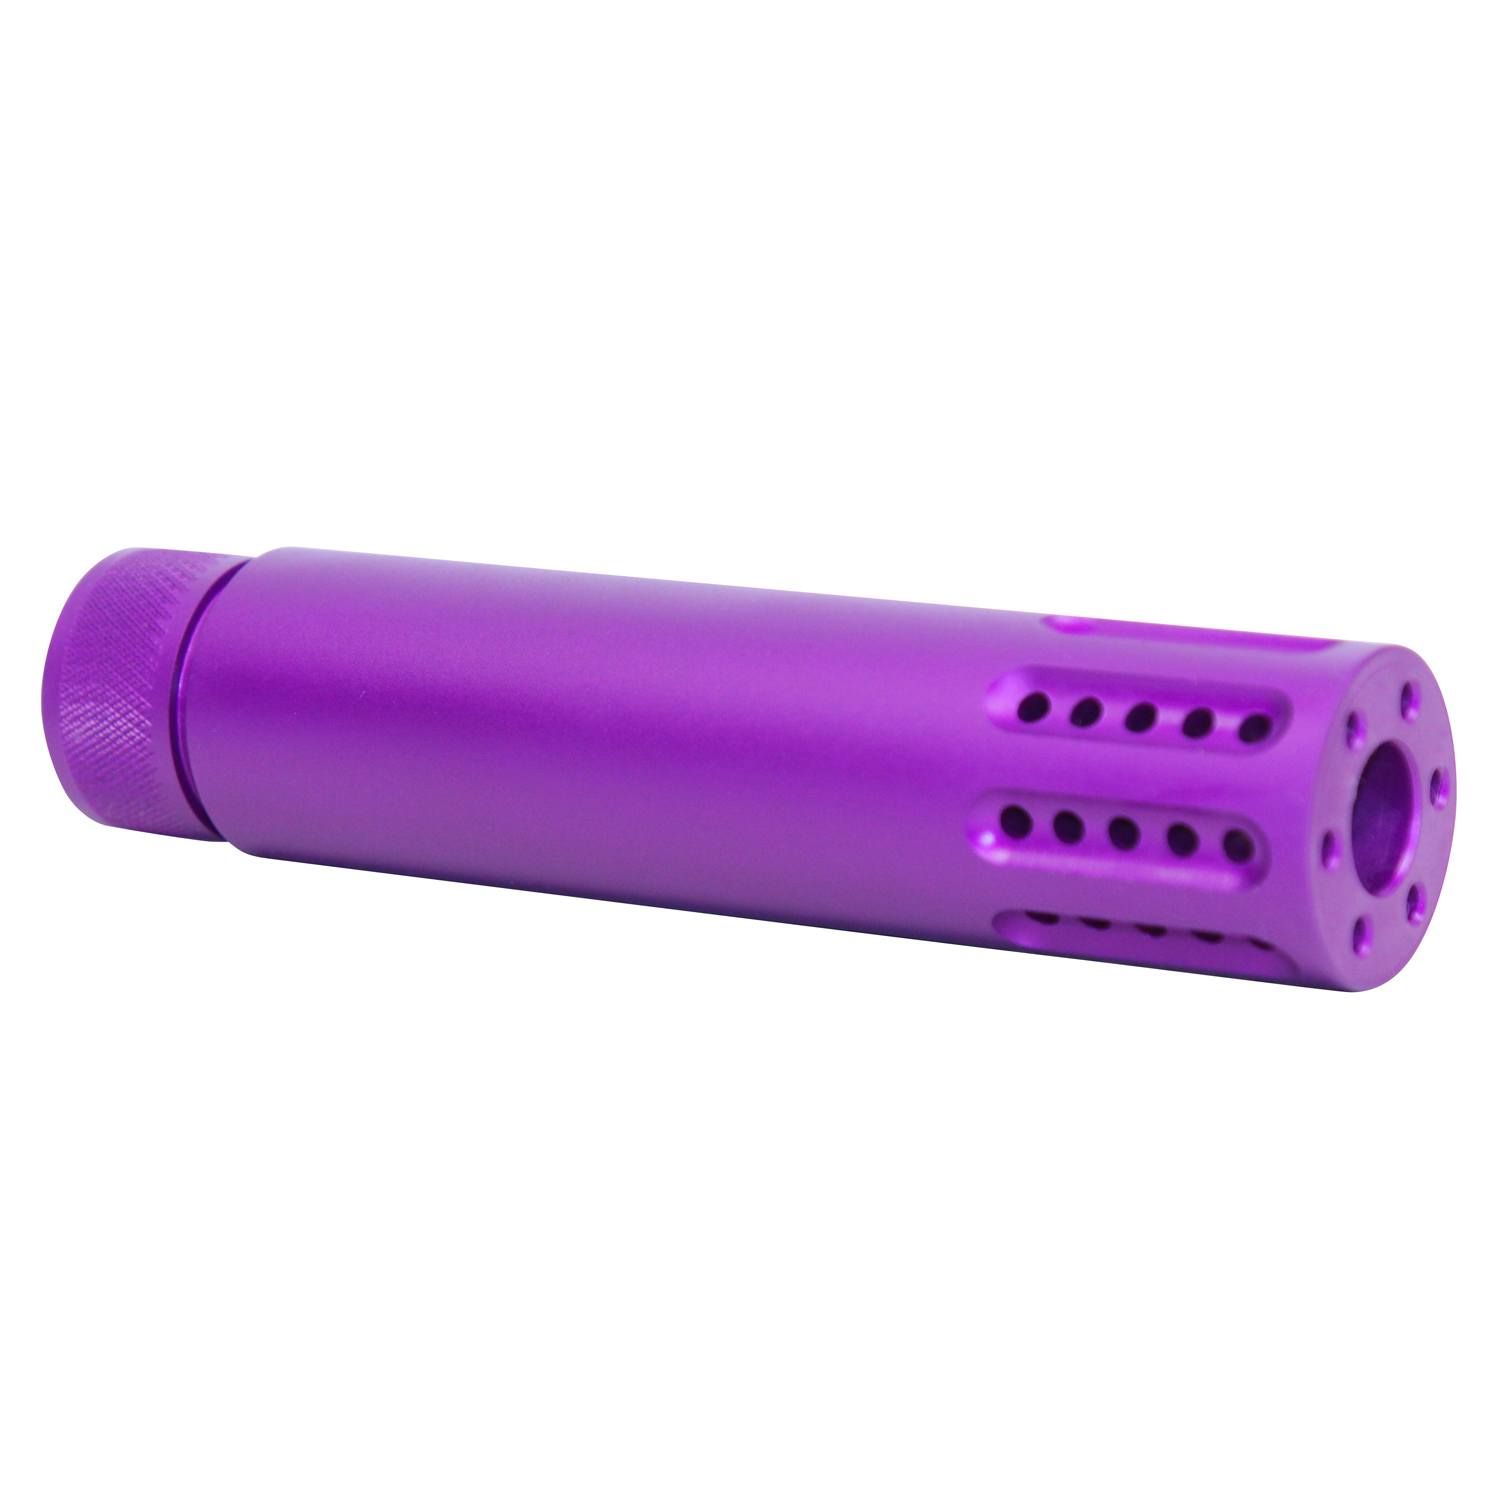 Slip over Fake suppressor with holes in anodized purple